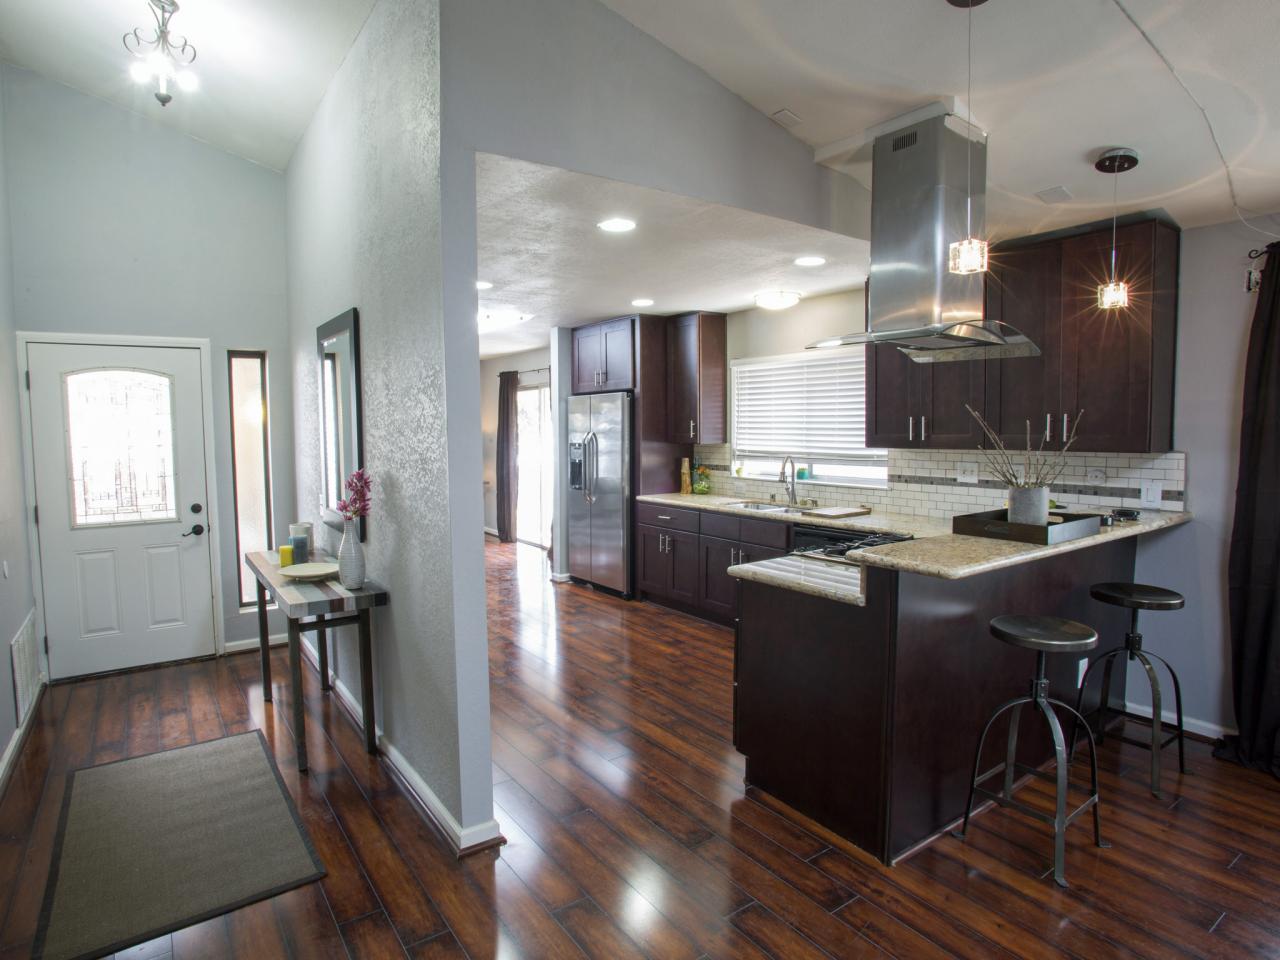 The Pros And Cons Of Laminate Flooring, How To Tell If Cabinets Are Laminate Or Wooden Floors